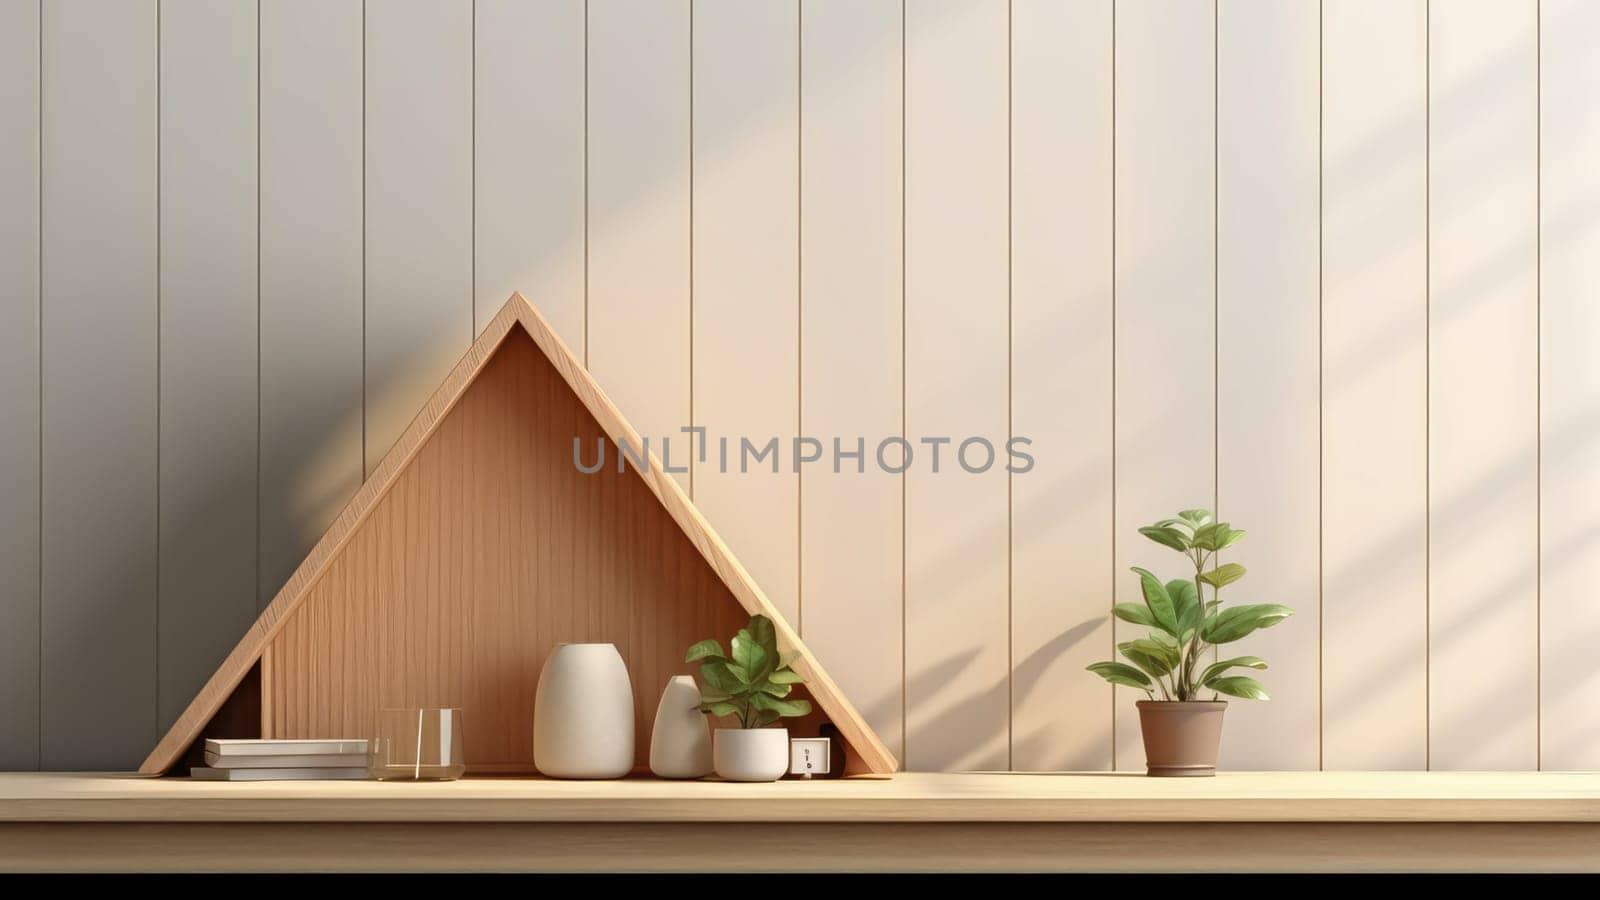 3D render of a modern wooden house with a pointed roof and a large window. The overall impression is one of a modern and stylish home that is surrounded by nature.